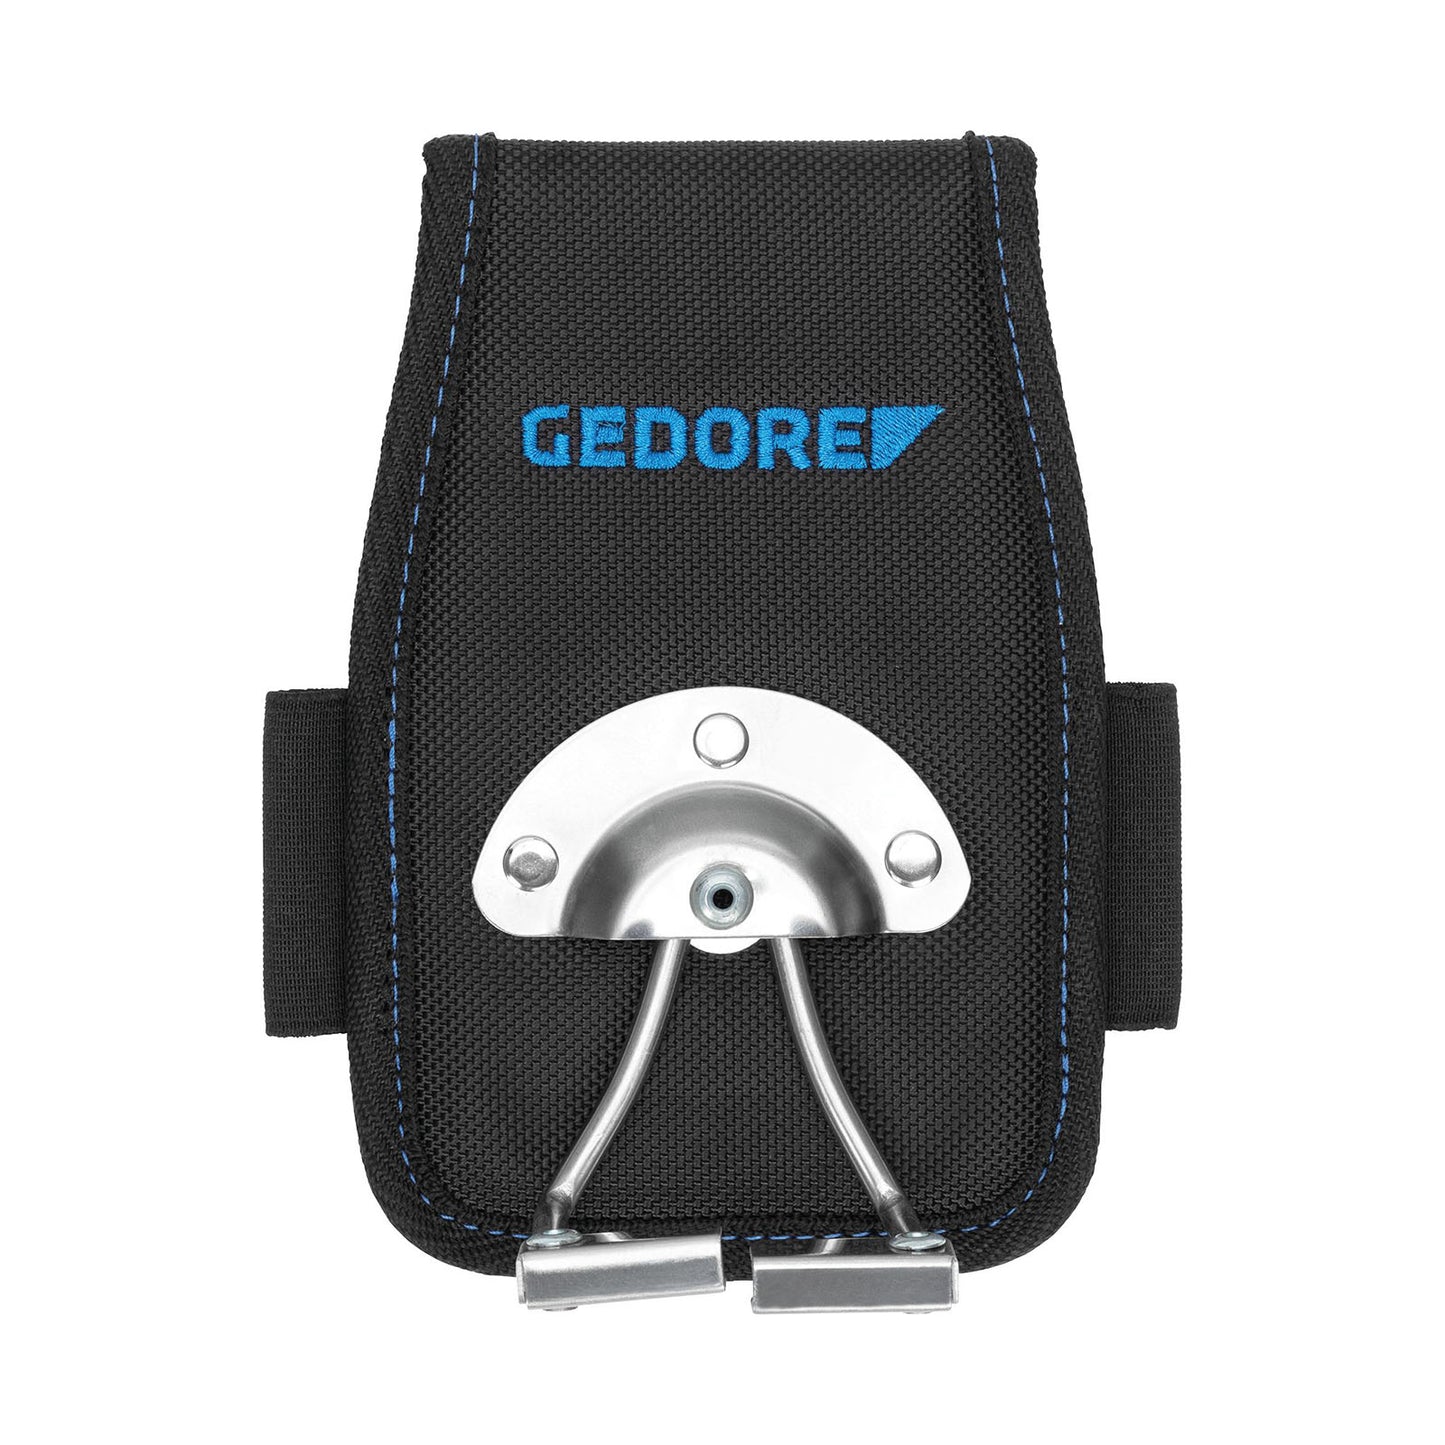 GEDORE WT 1056 4 - Holster for hammers with hook (1818155)